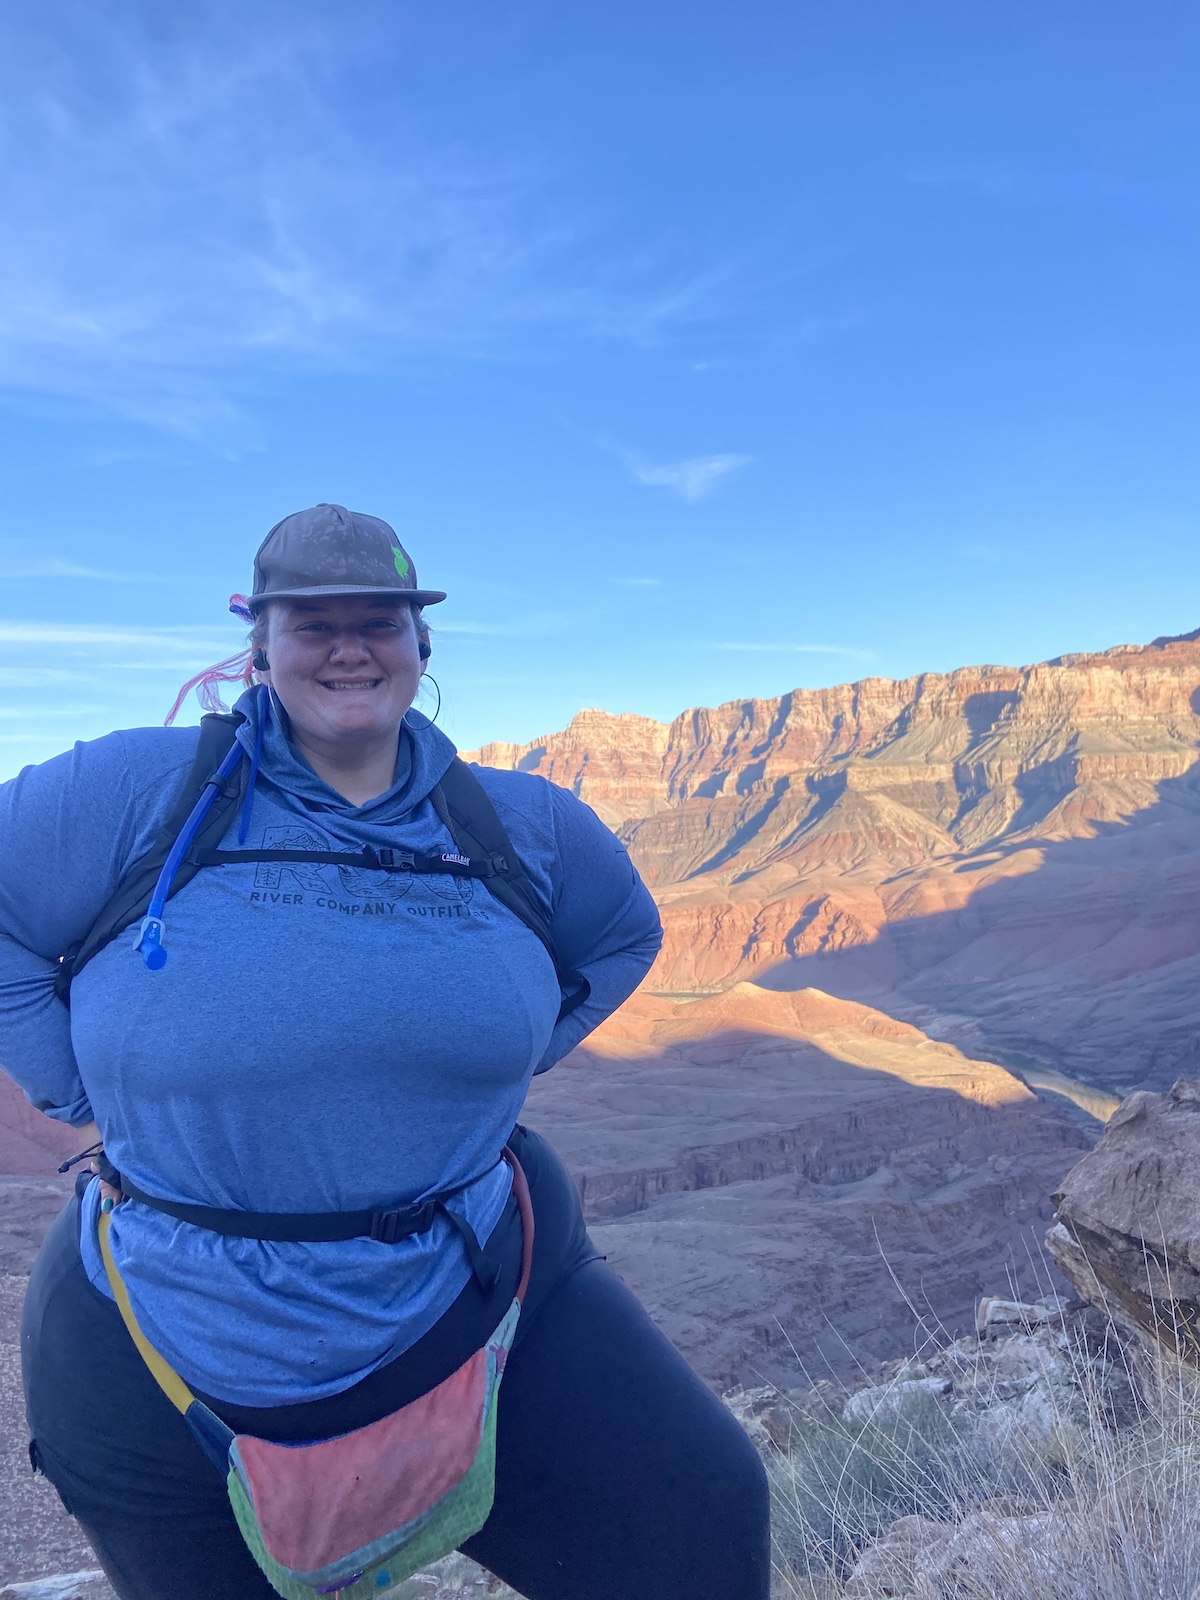 a woman hiking and posing in front of the Grand Canyon